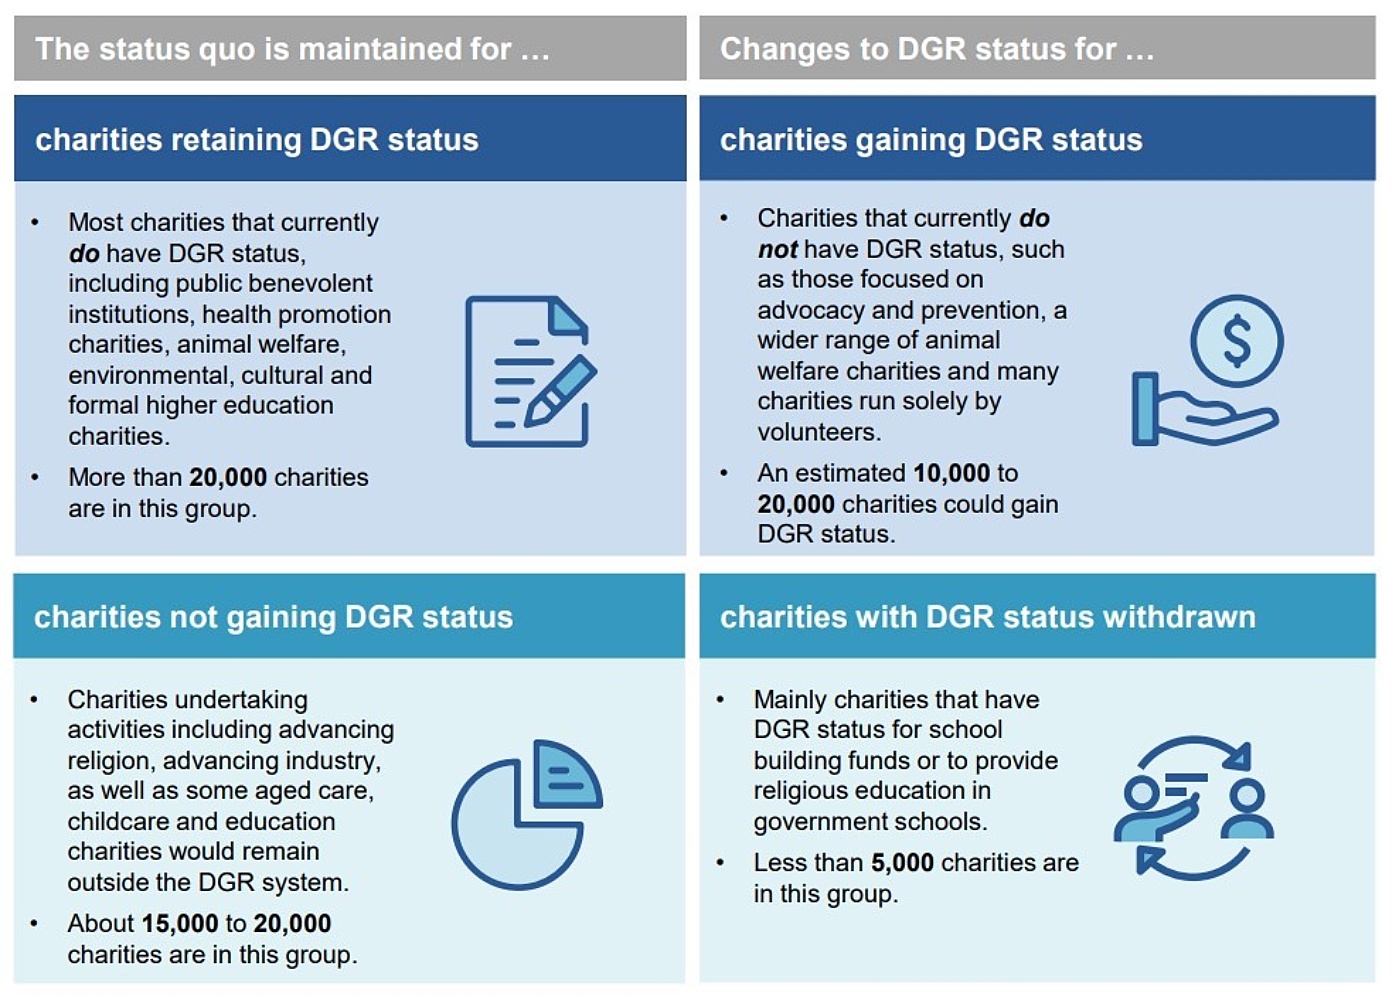 Likely outcome for charities reforming the DGR system